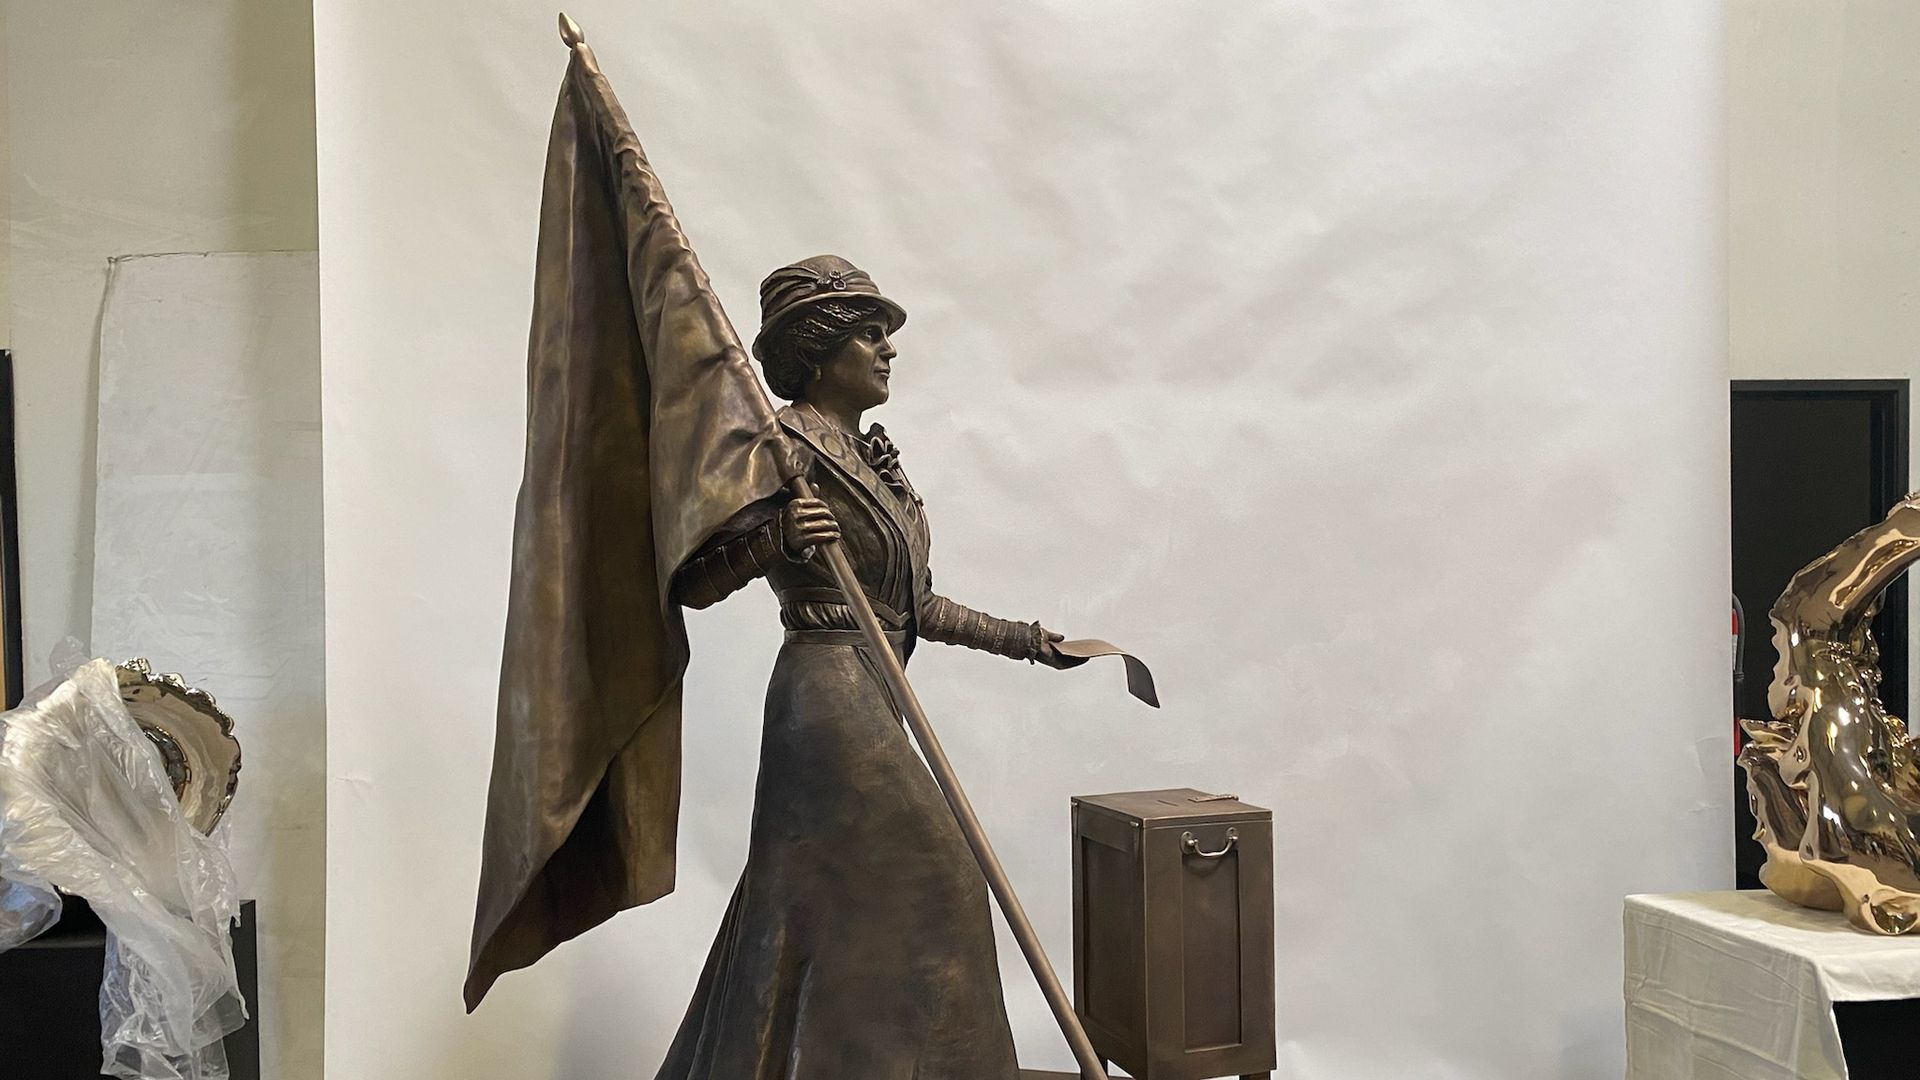 A side view of a bronze statue of a woman holding a flagpole in her right hand and a piece of paper in her left hand.